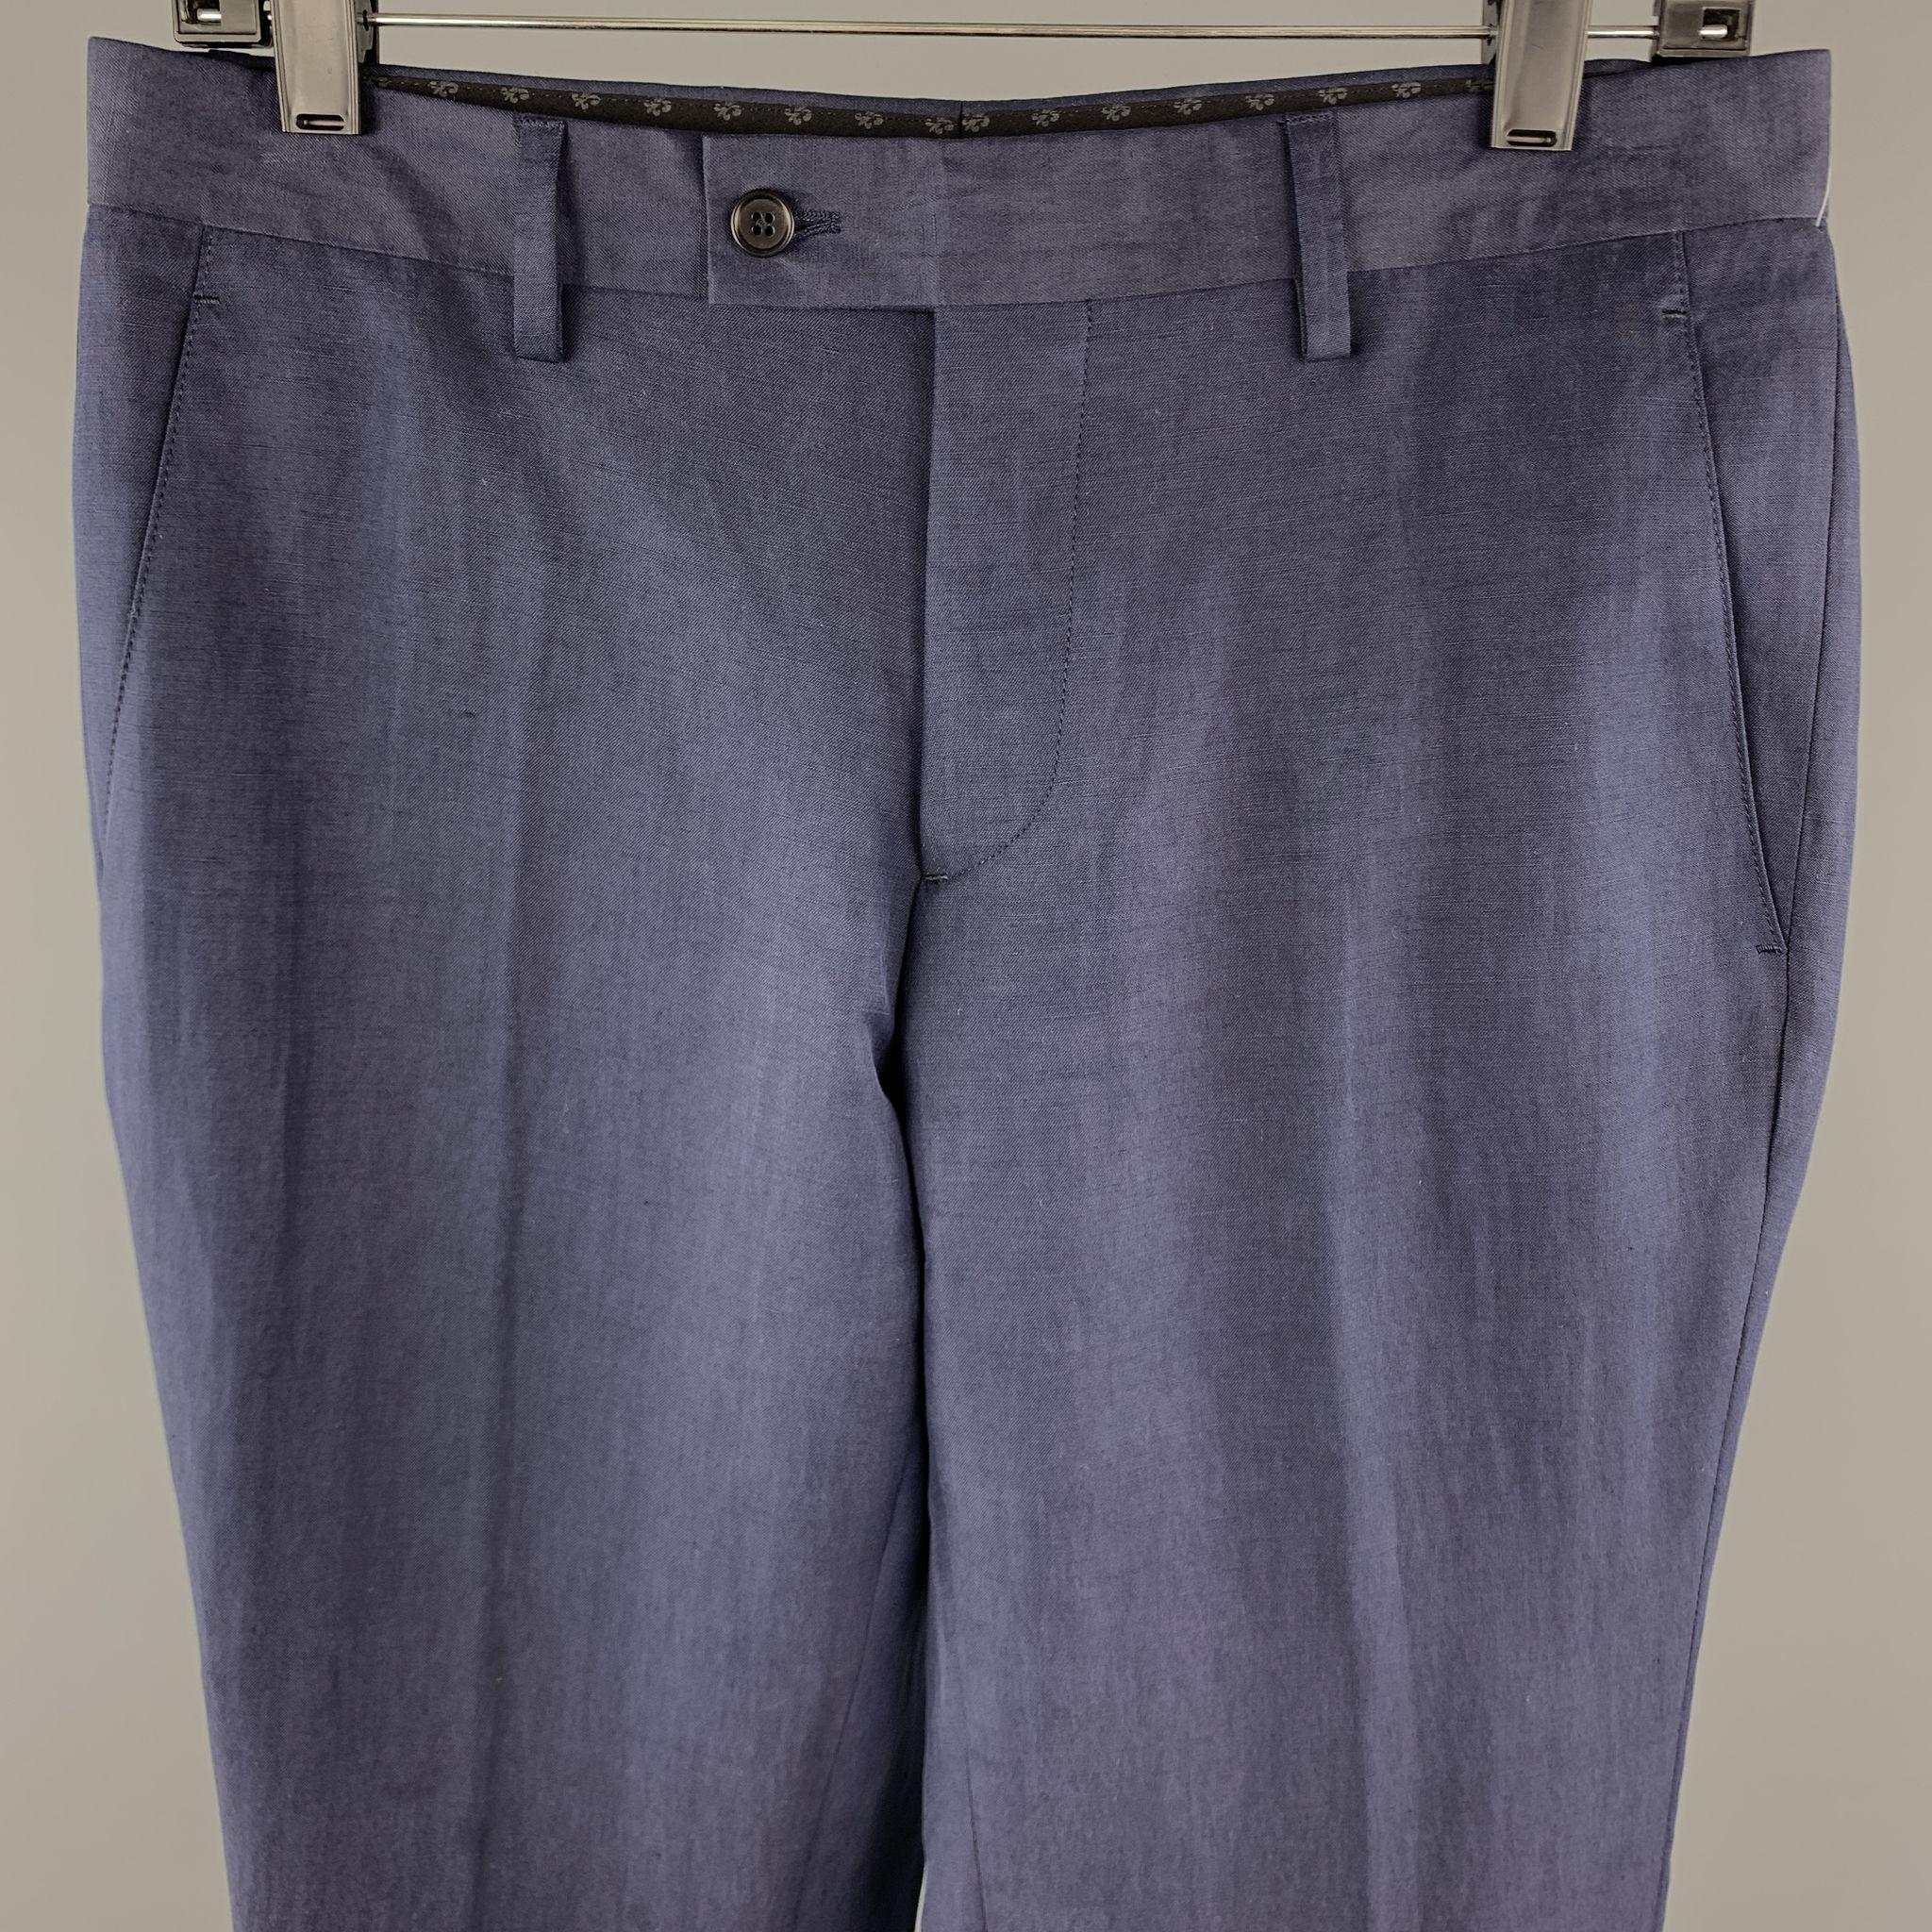 JOHN VARVATOS Casual Pants comes in a navy tone in a solid linen / silk material, with a tab waist, a zip fly, and seam and slit pockets. Made in Italy.

Excellent Pre-Owned Condition.
Marked: IT 46

Measurements:

Waist: 32 in. 
Rise: 9.5 in.